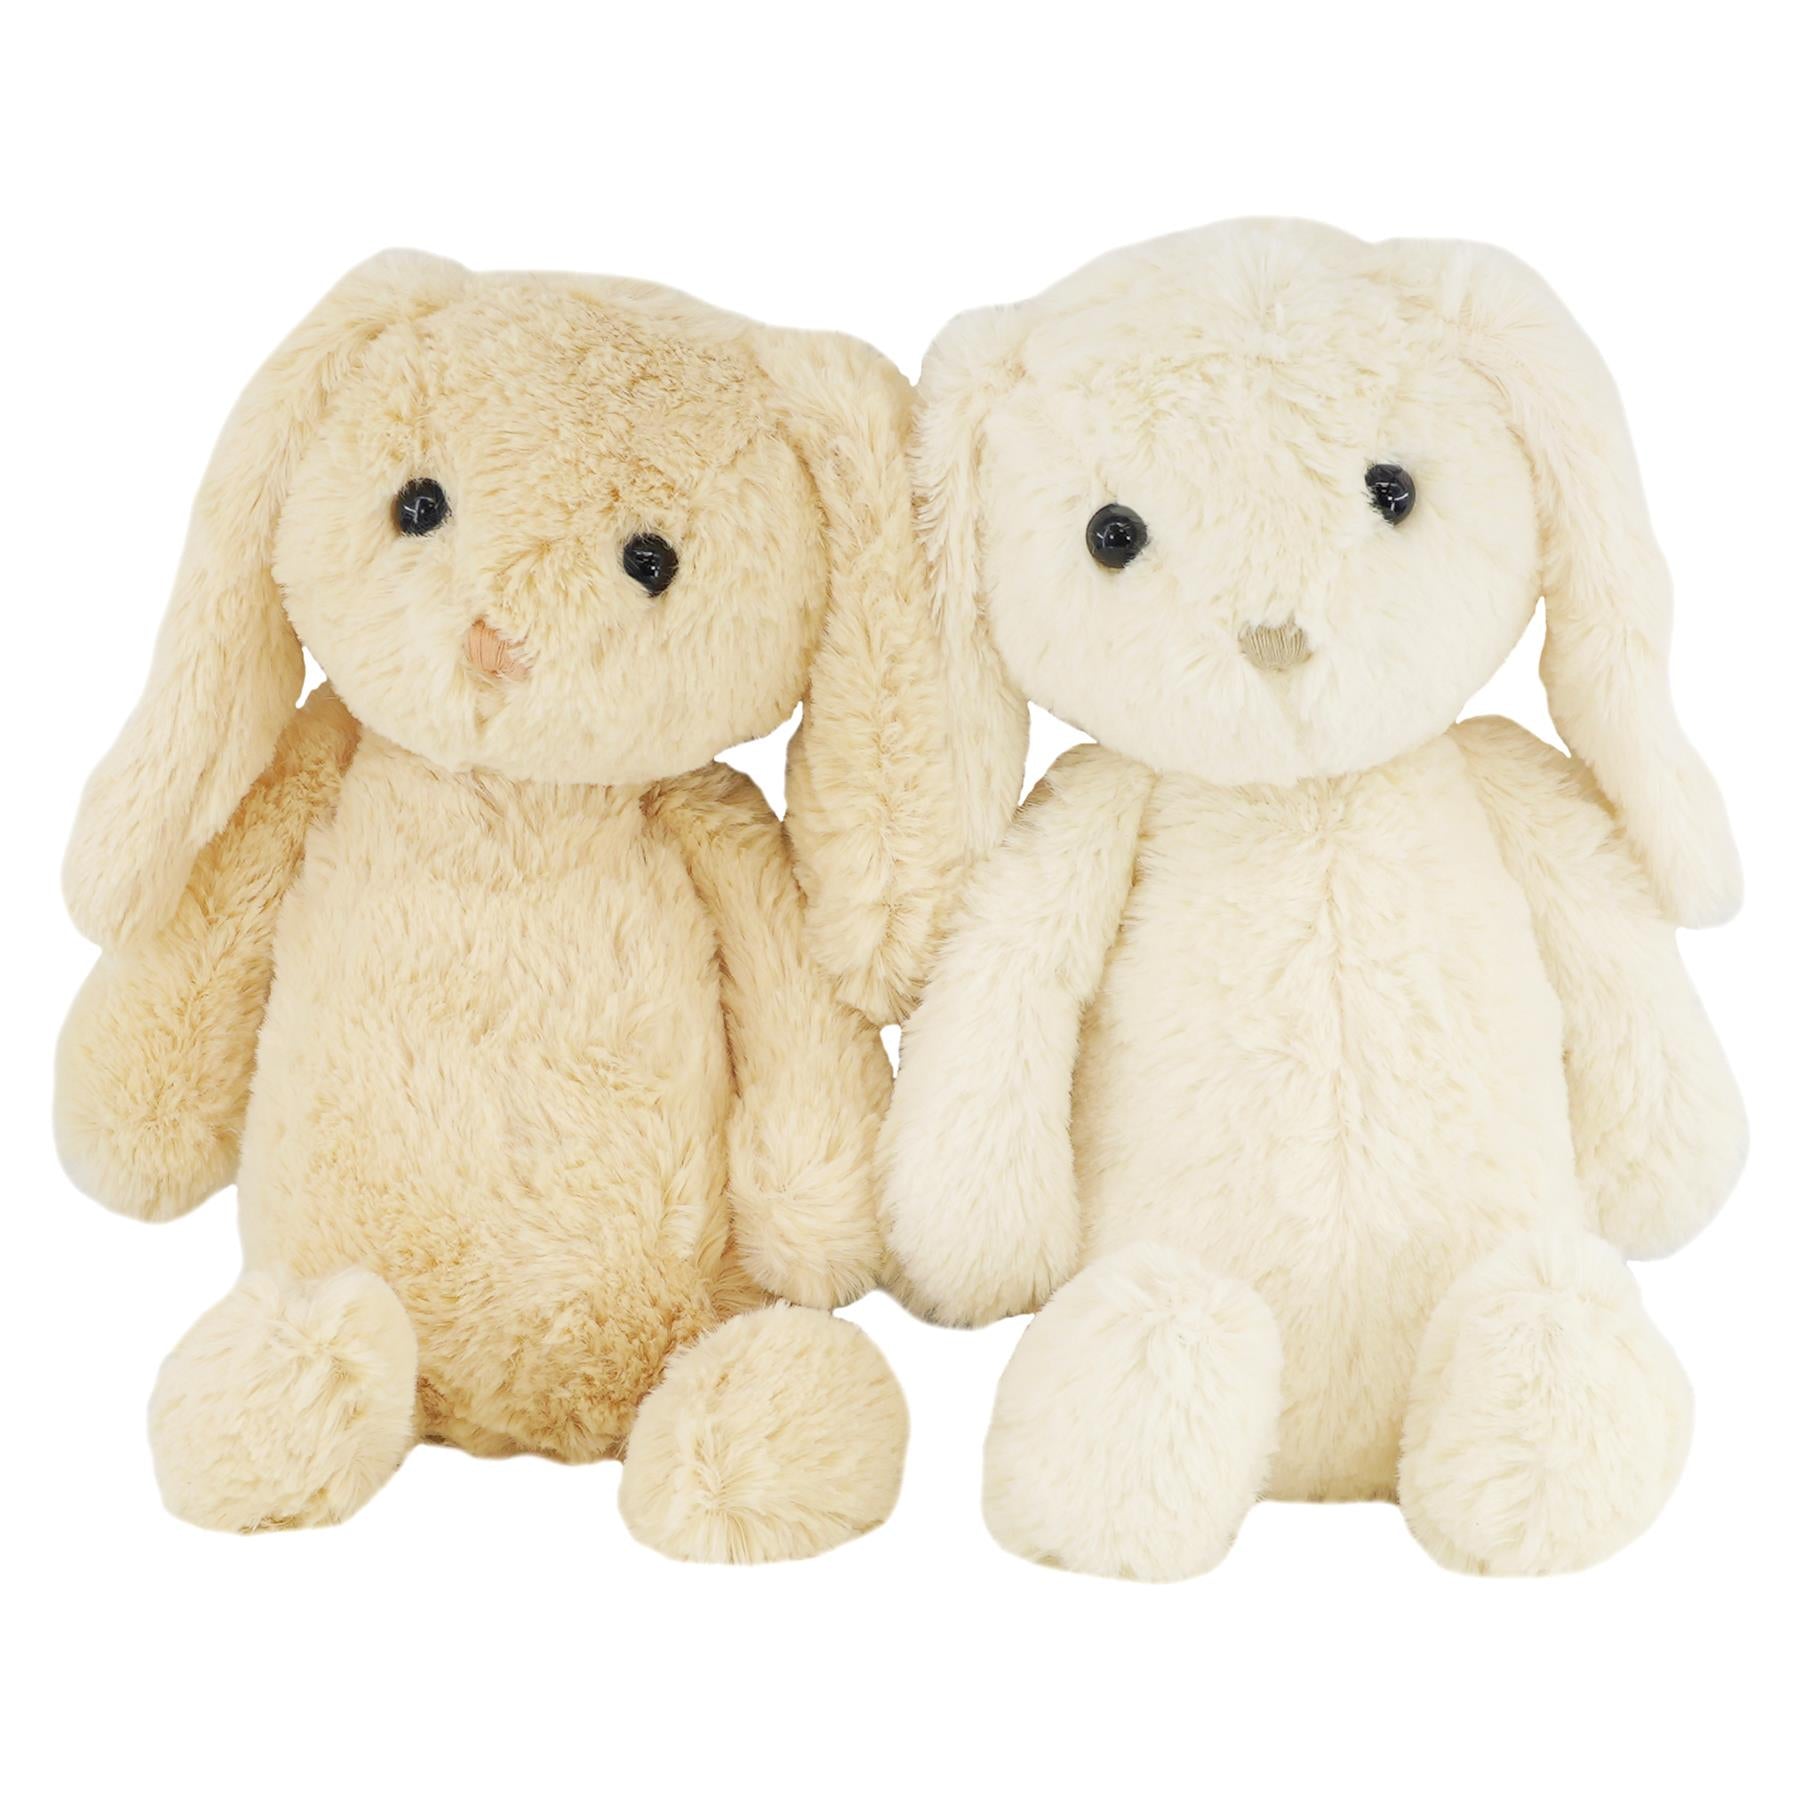 Plush Beige / Cream Bunny Rabbit by The Magic Toy Shop - The Magic Toy Shop